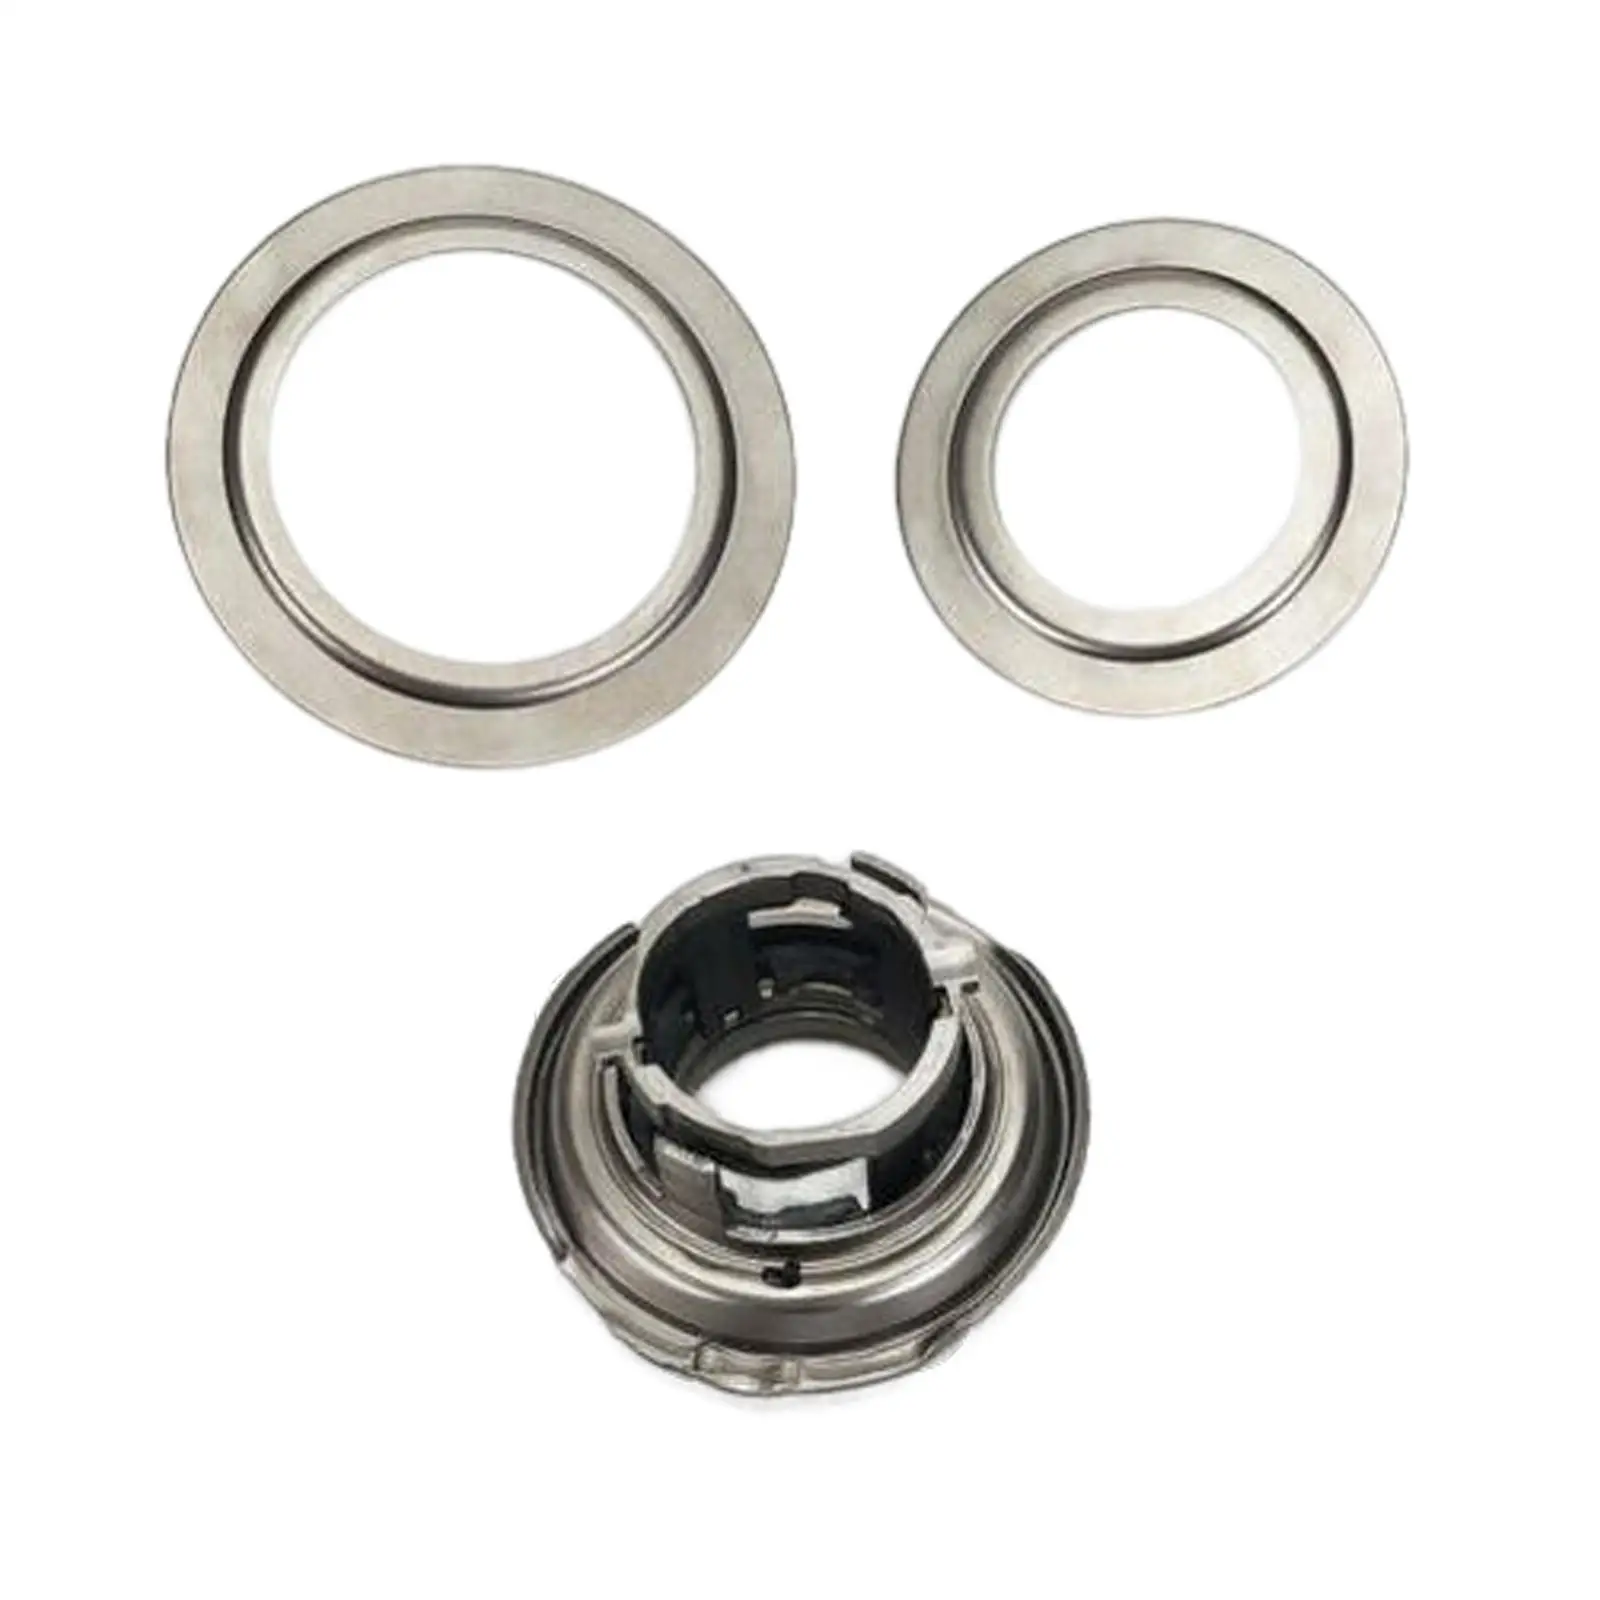 Auto Transmission Bearing Kit 6Dct250 Dps6 Fit for   Fiesta B Max